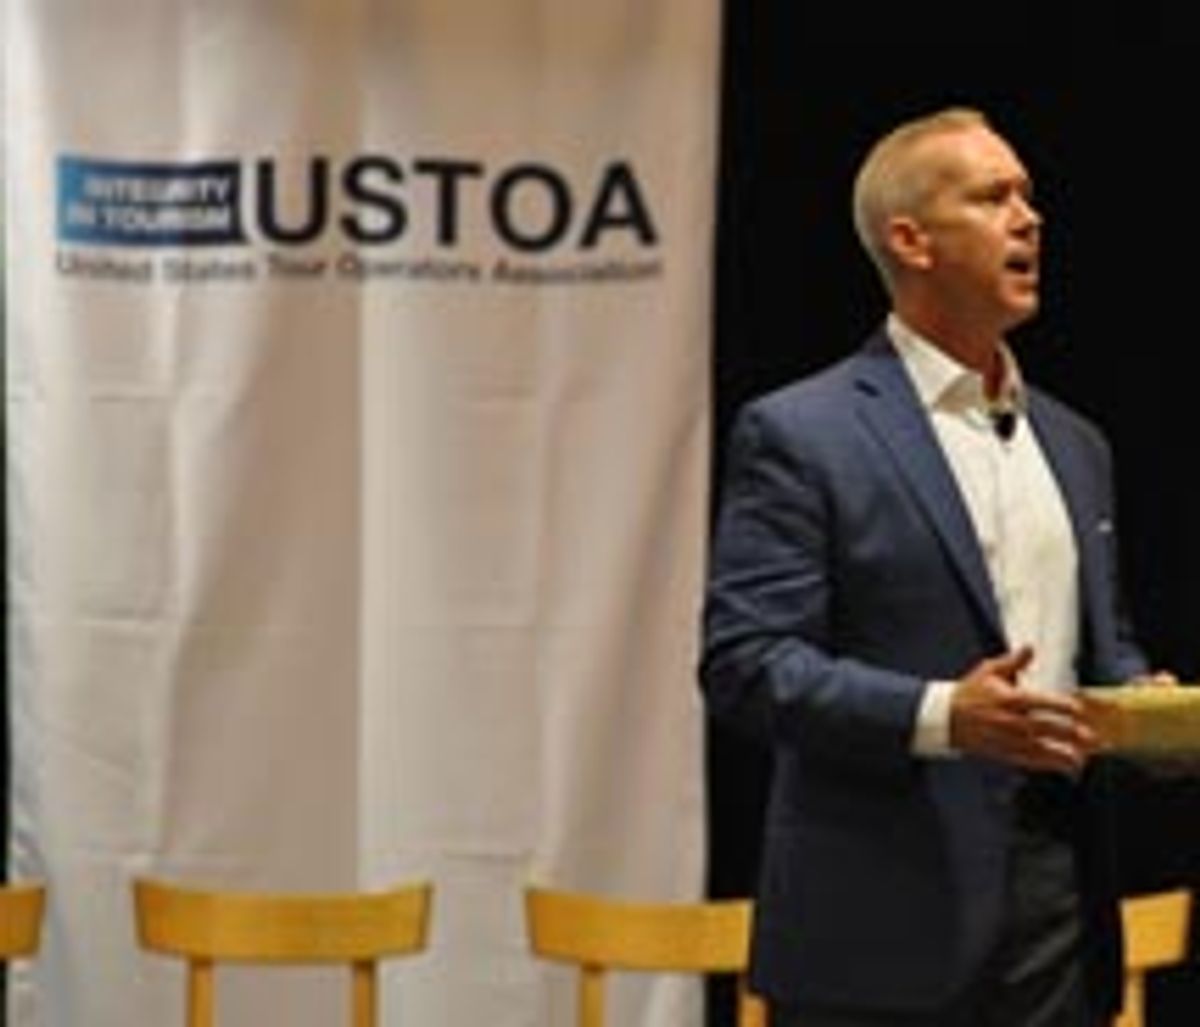 USTOA Conference Showcases Best of Industry TravelAge West